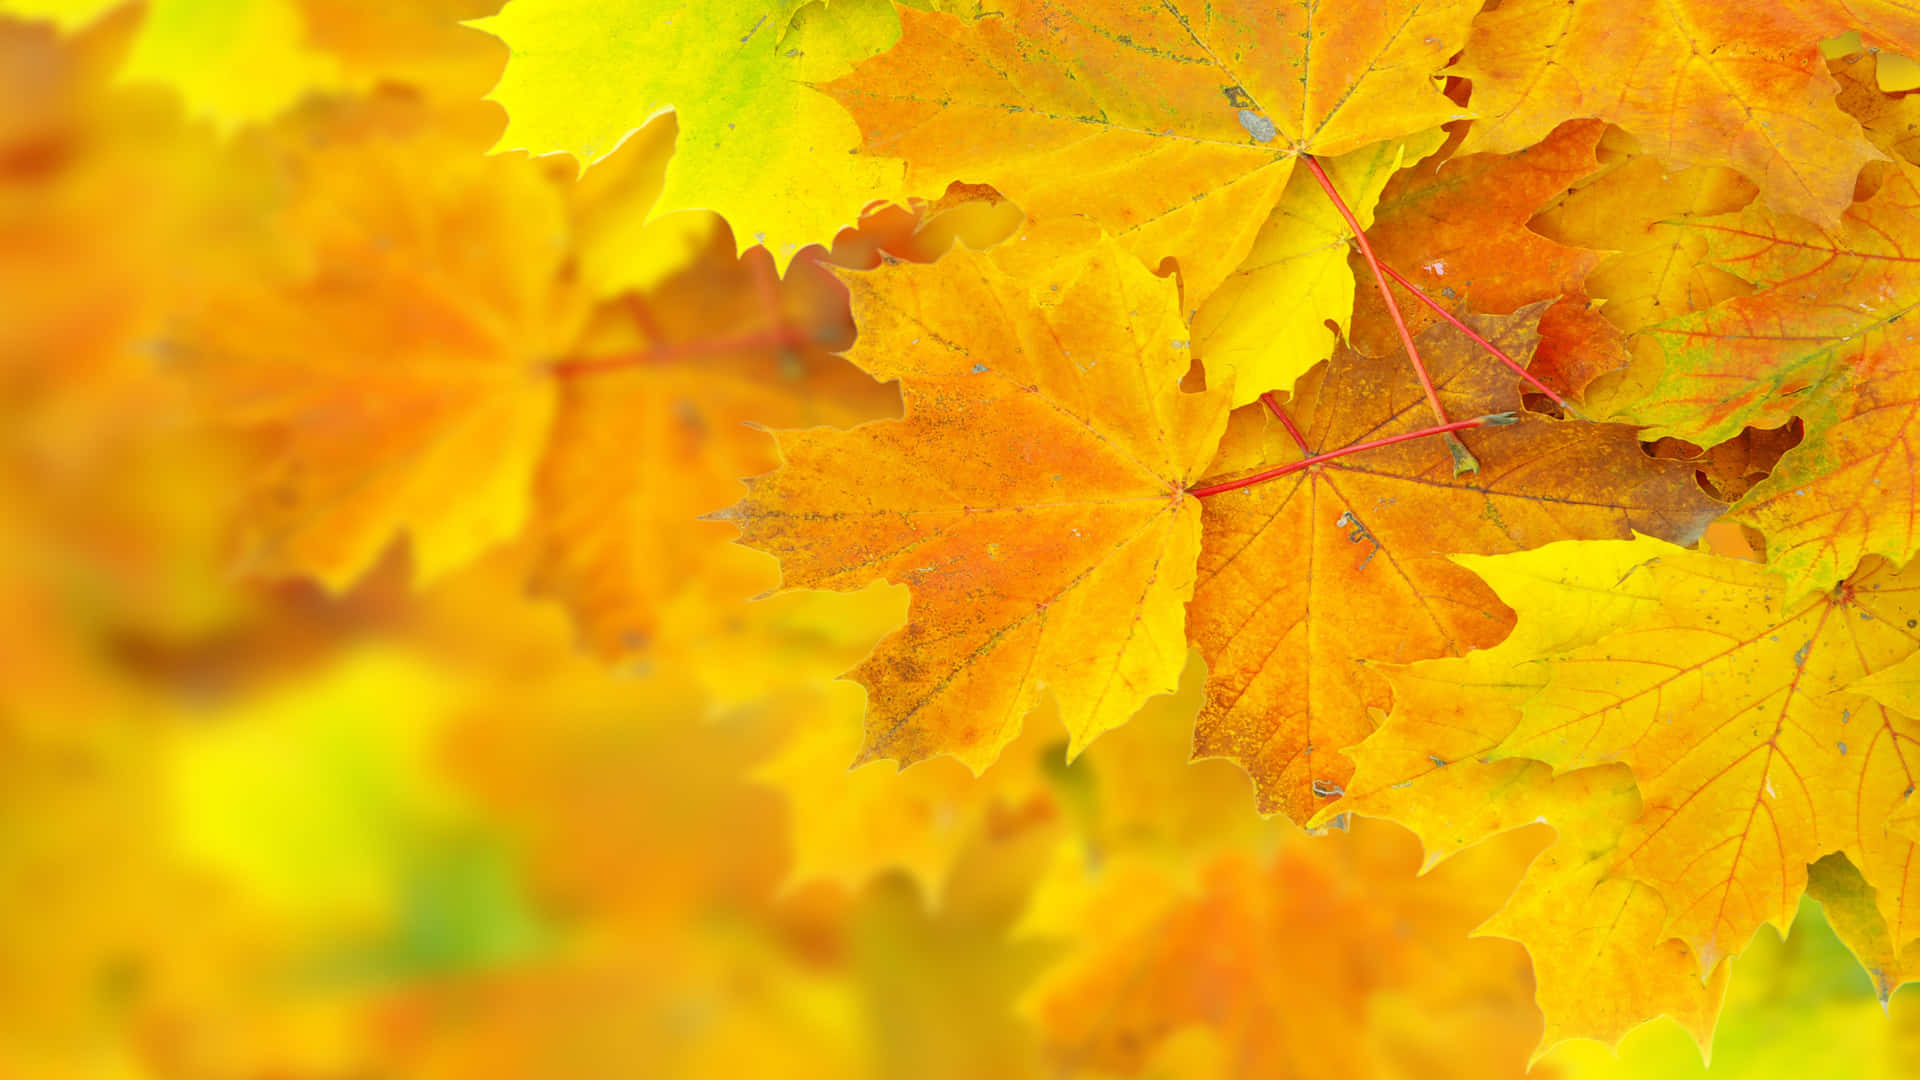 Yellow Leaves Boosting Aesthetic Beauty in Autumn Wallpaper